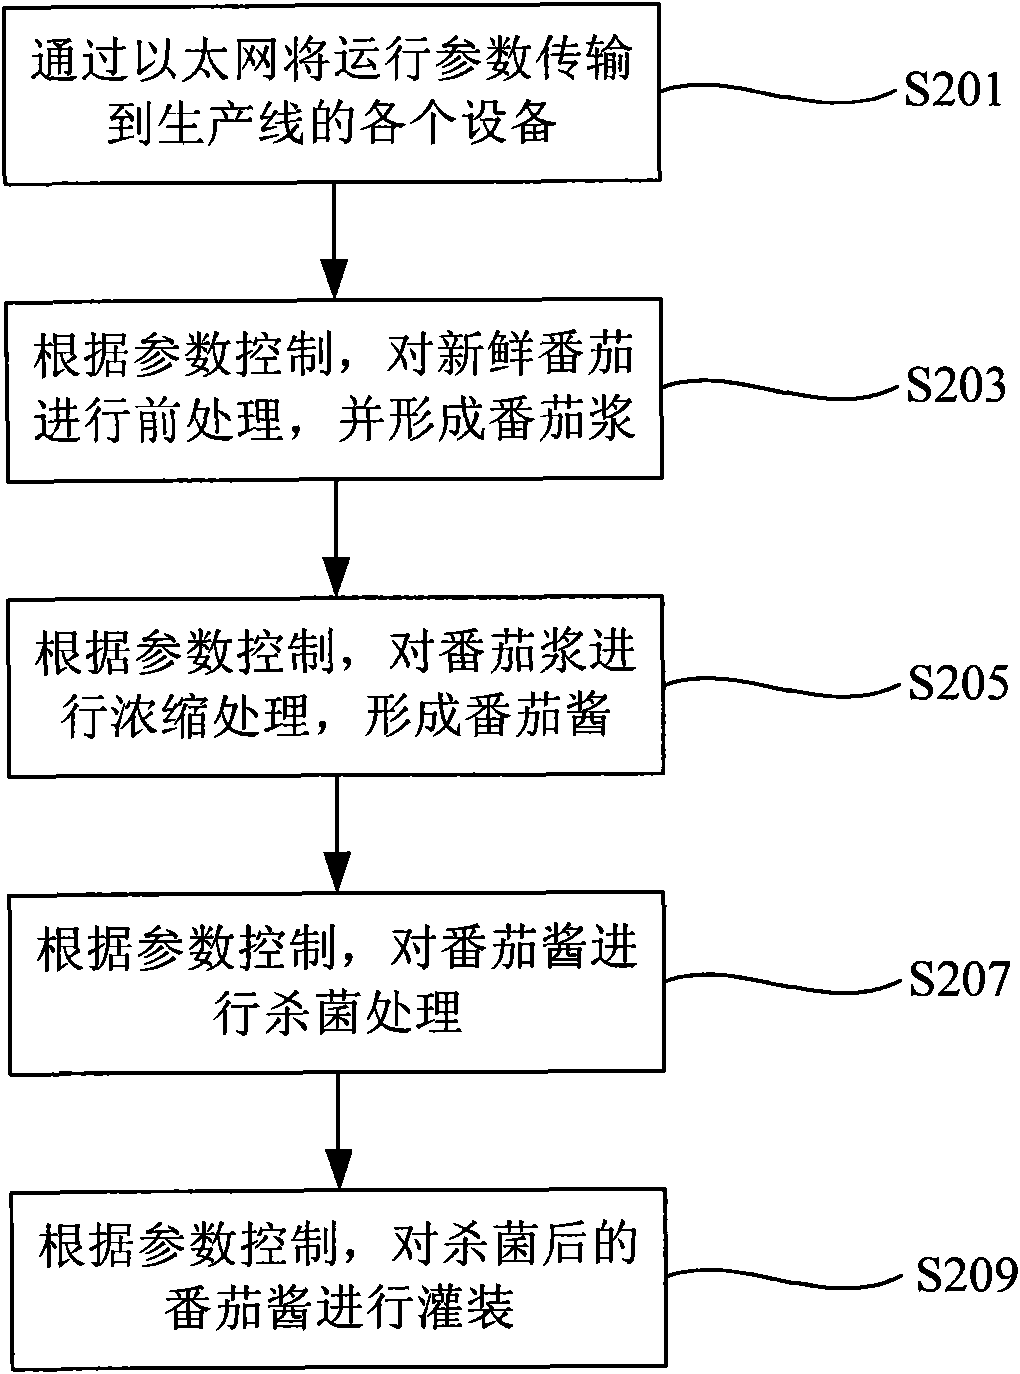 Production method of tomato sauce and production flow line system of tomato sauce